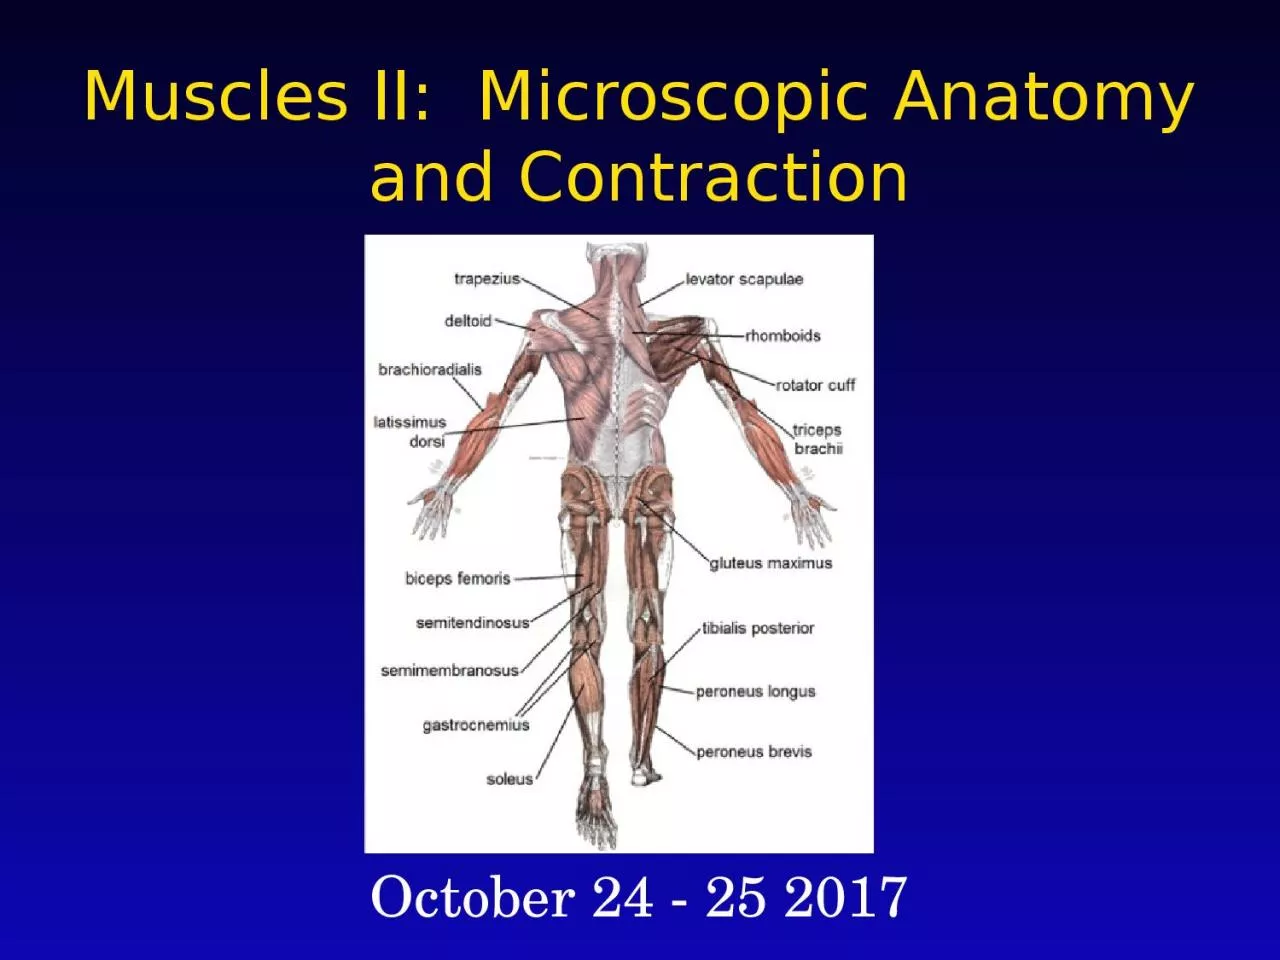 Muscles II:  Microscopic Anatomy and Contraction